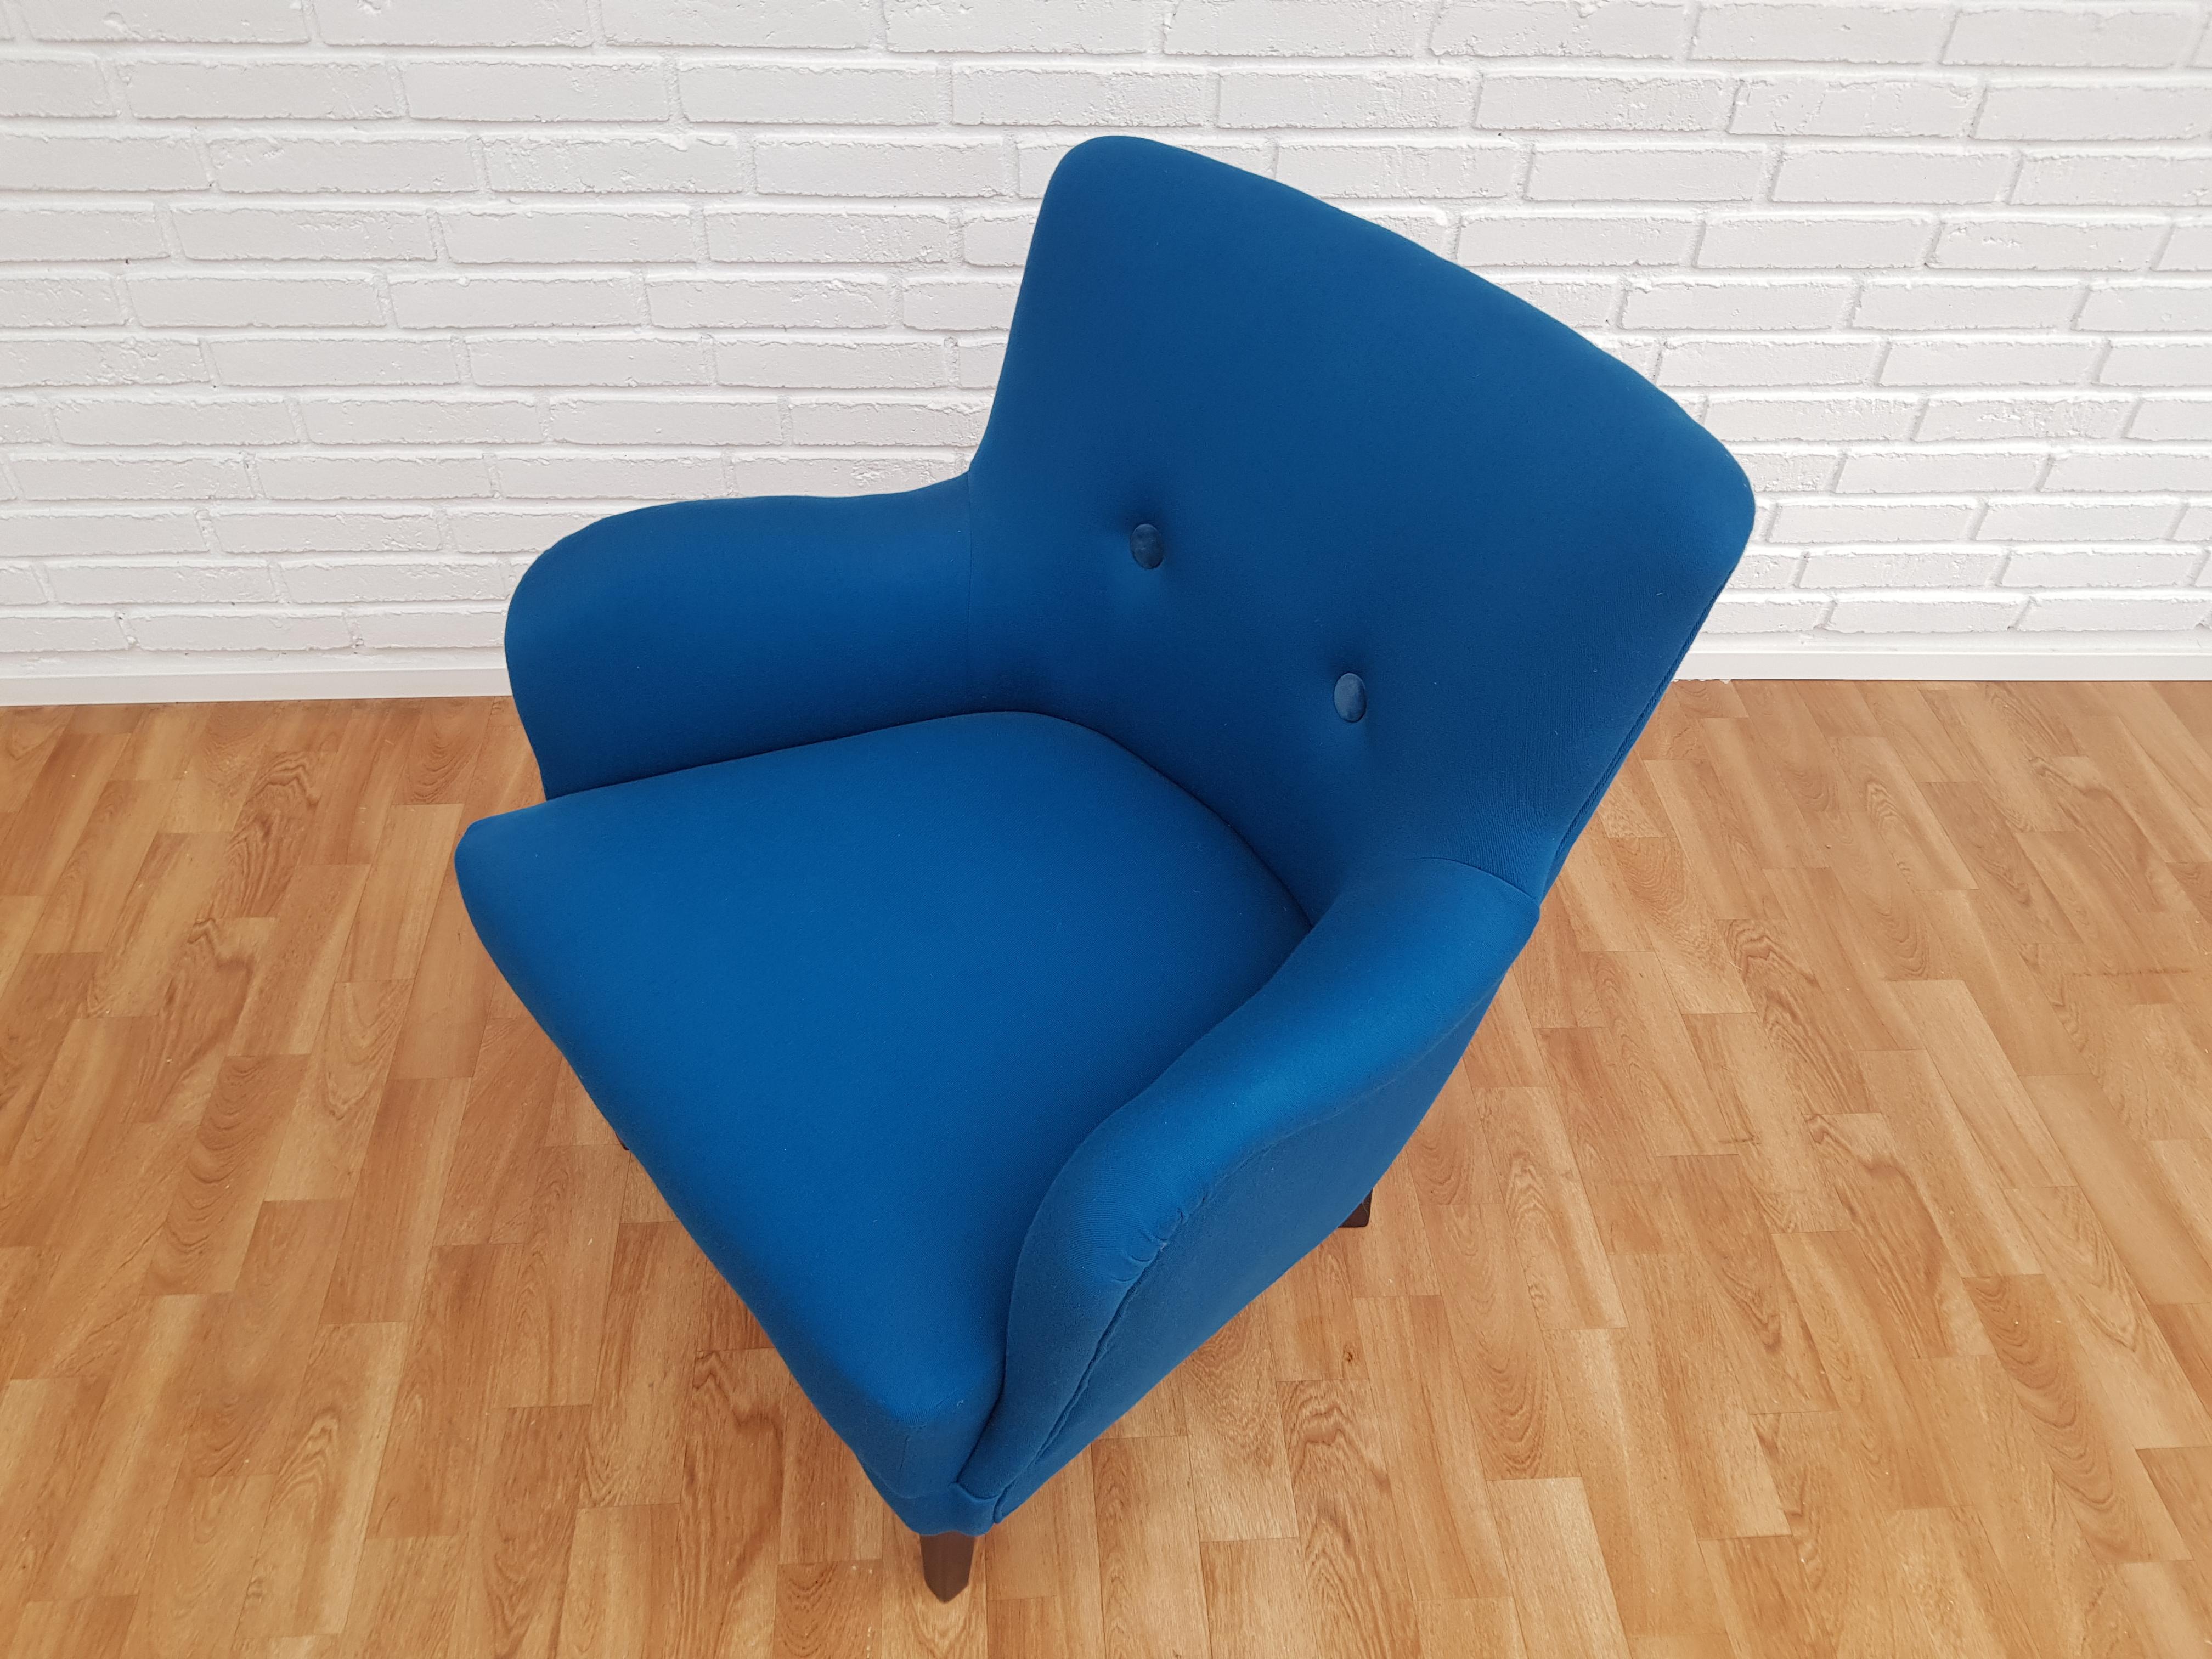 Danish armchair. New reupholstered in quality turquoise blue wool fabric by professional furniture upholsterer at Retro Møbler Galleri. Velour buttons. Made by Danish furniture manufacturer circa 1970. The seat with original 